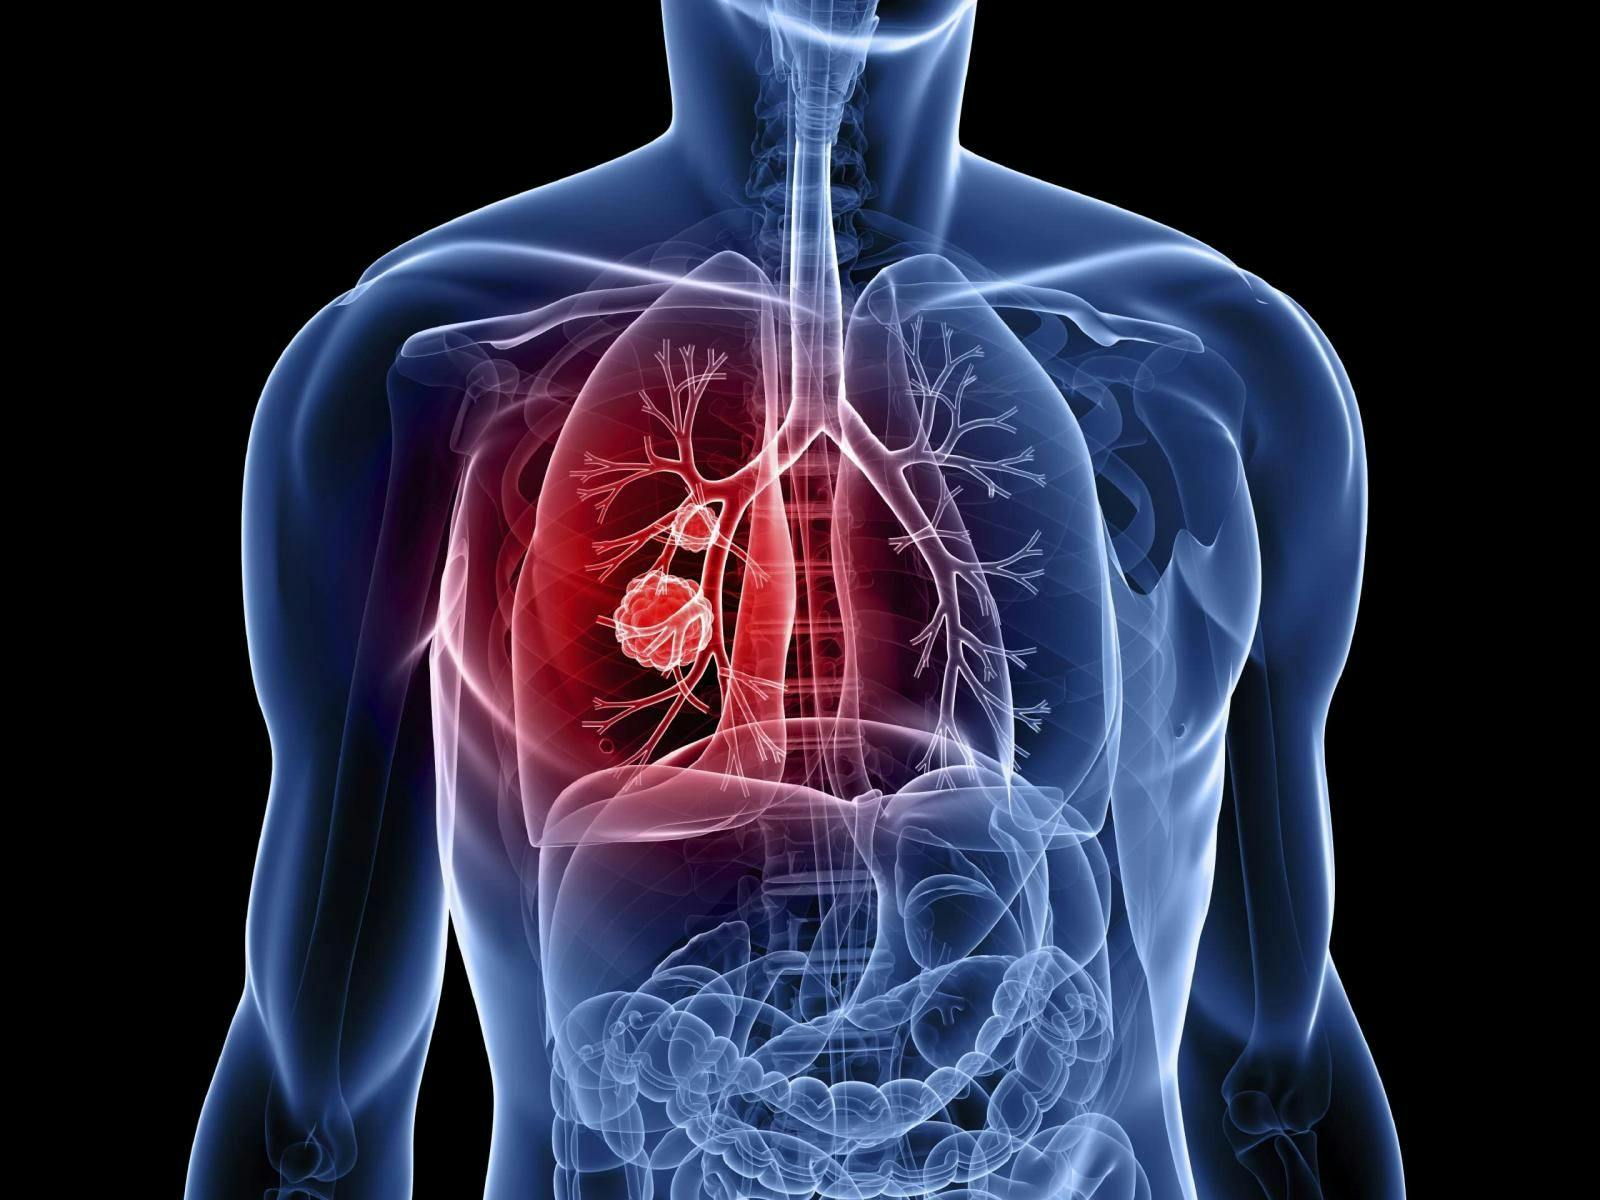 Afatinib Approval Expanded for Rare Lung Cancer Treatment